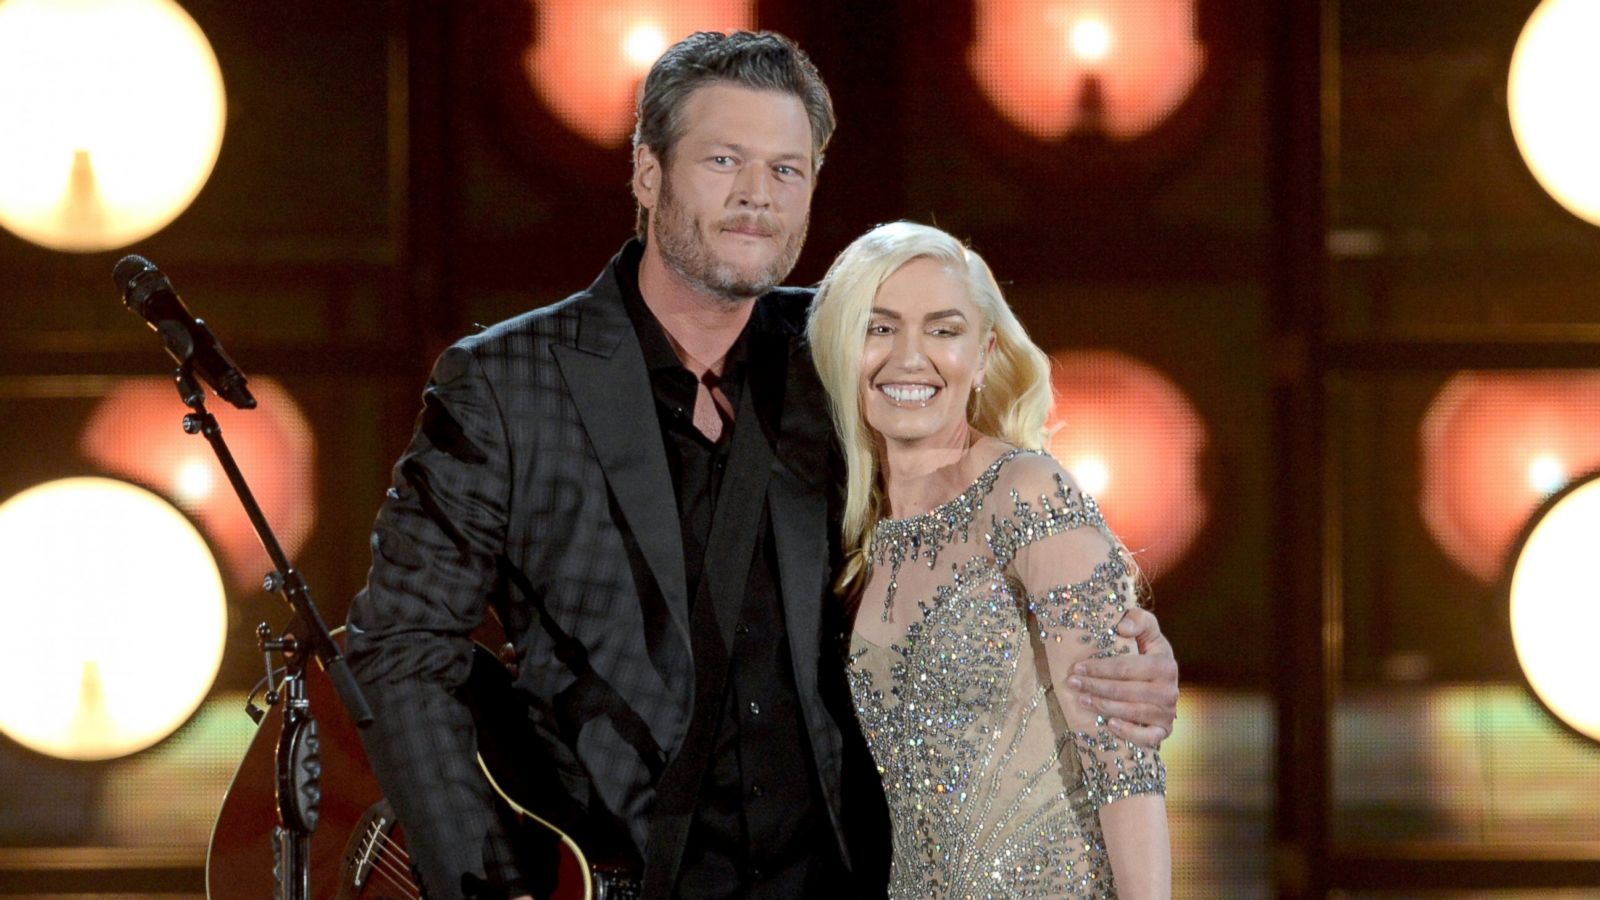 Blake Shelton Devastated: Snubbed By Academy Of Country Music – Romance  With Gwen Stefani To Blame?